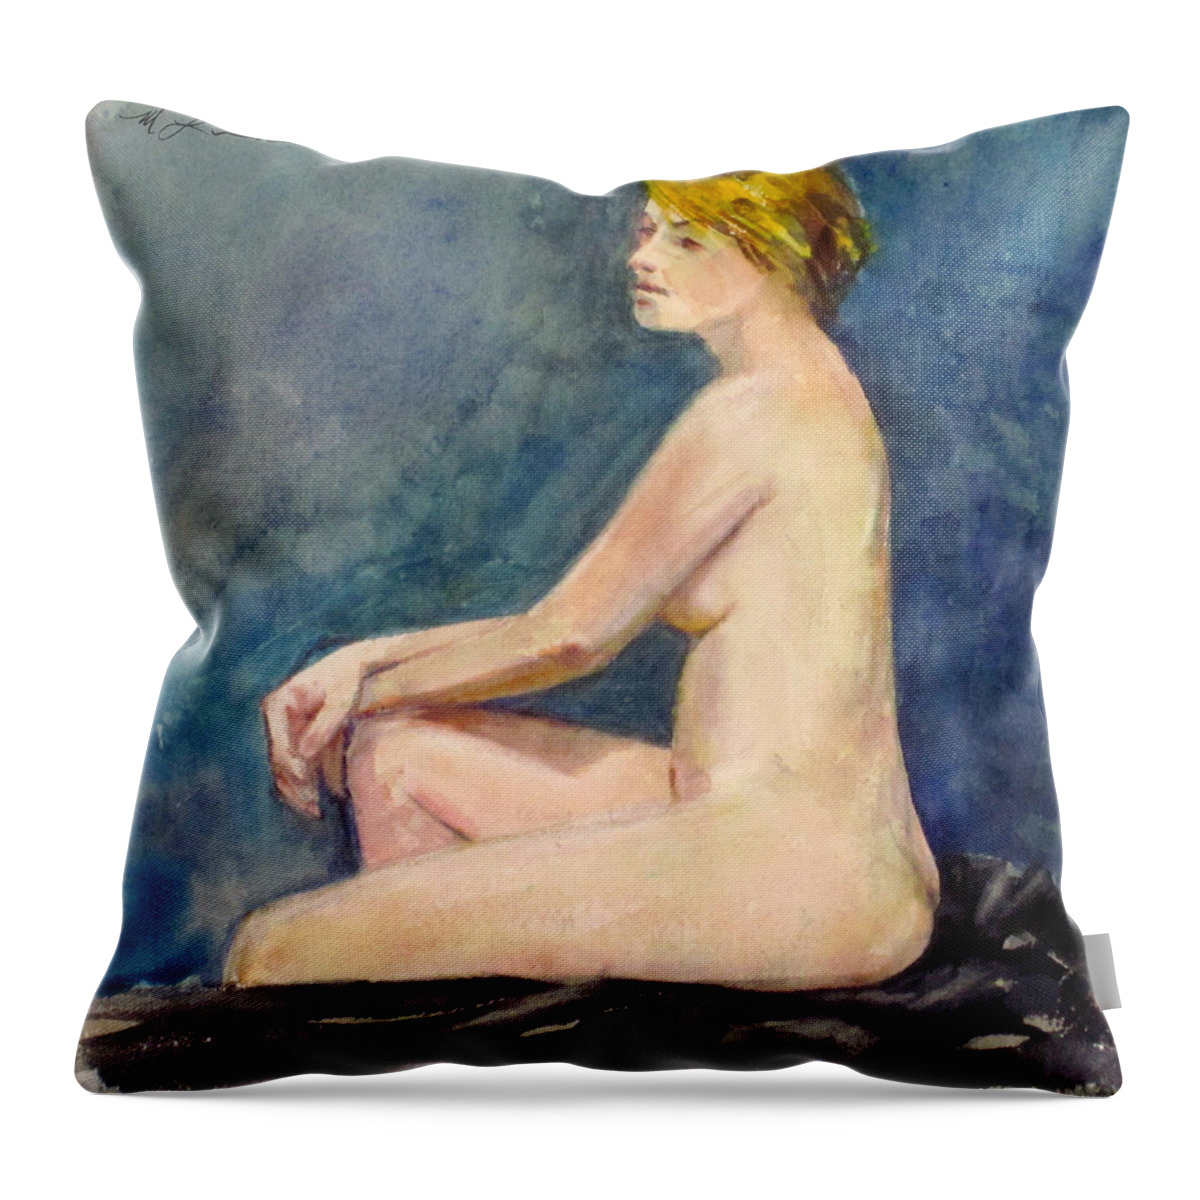 Seated Nude Watercolor Throw Pillow featuring the painting Seated Blond Nude by Mark Lunde